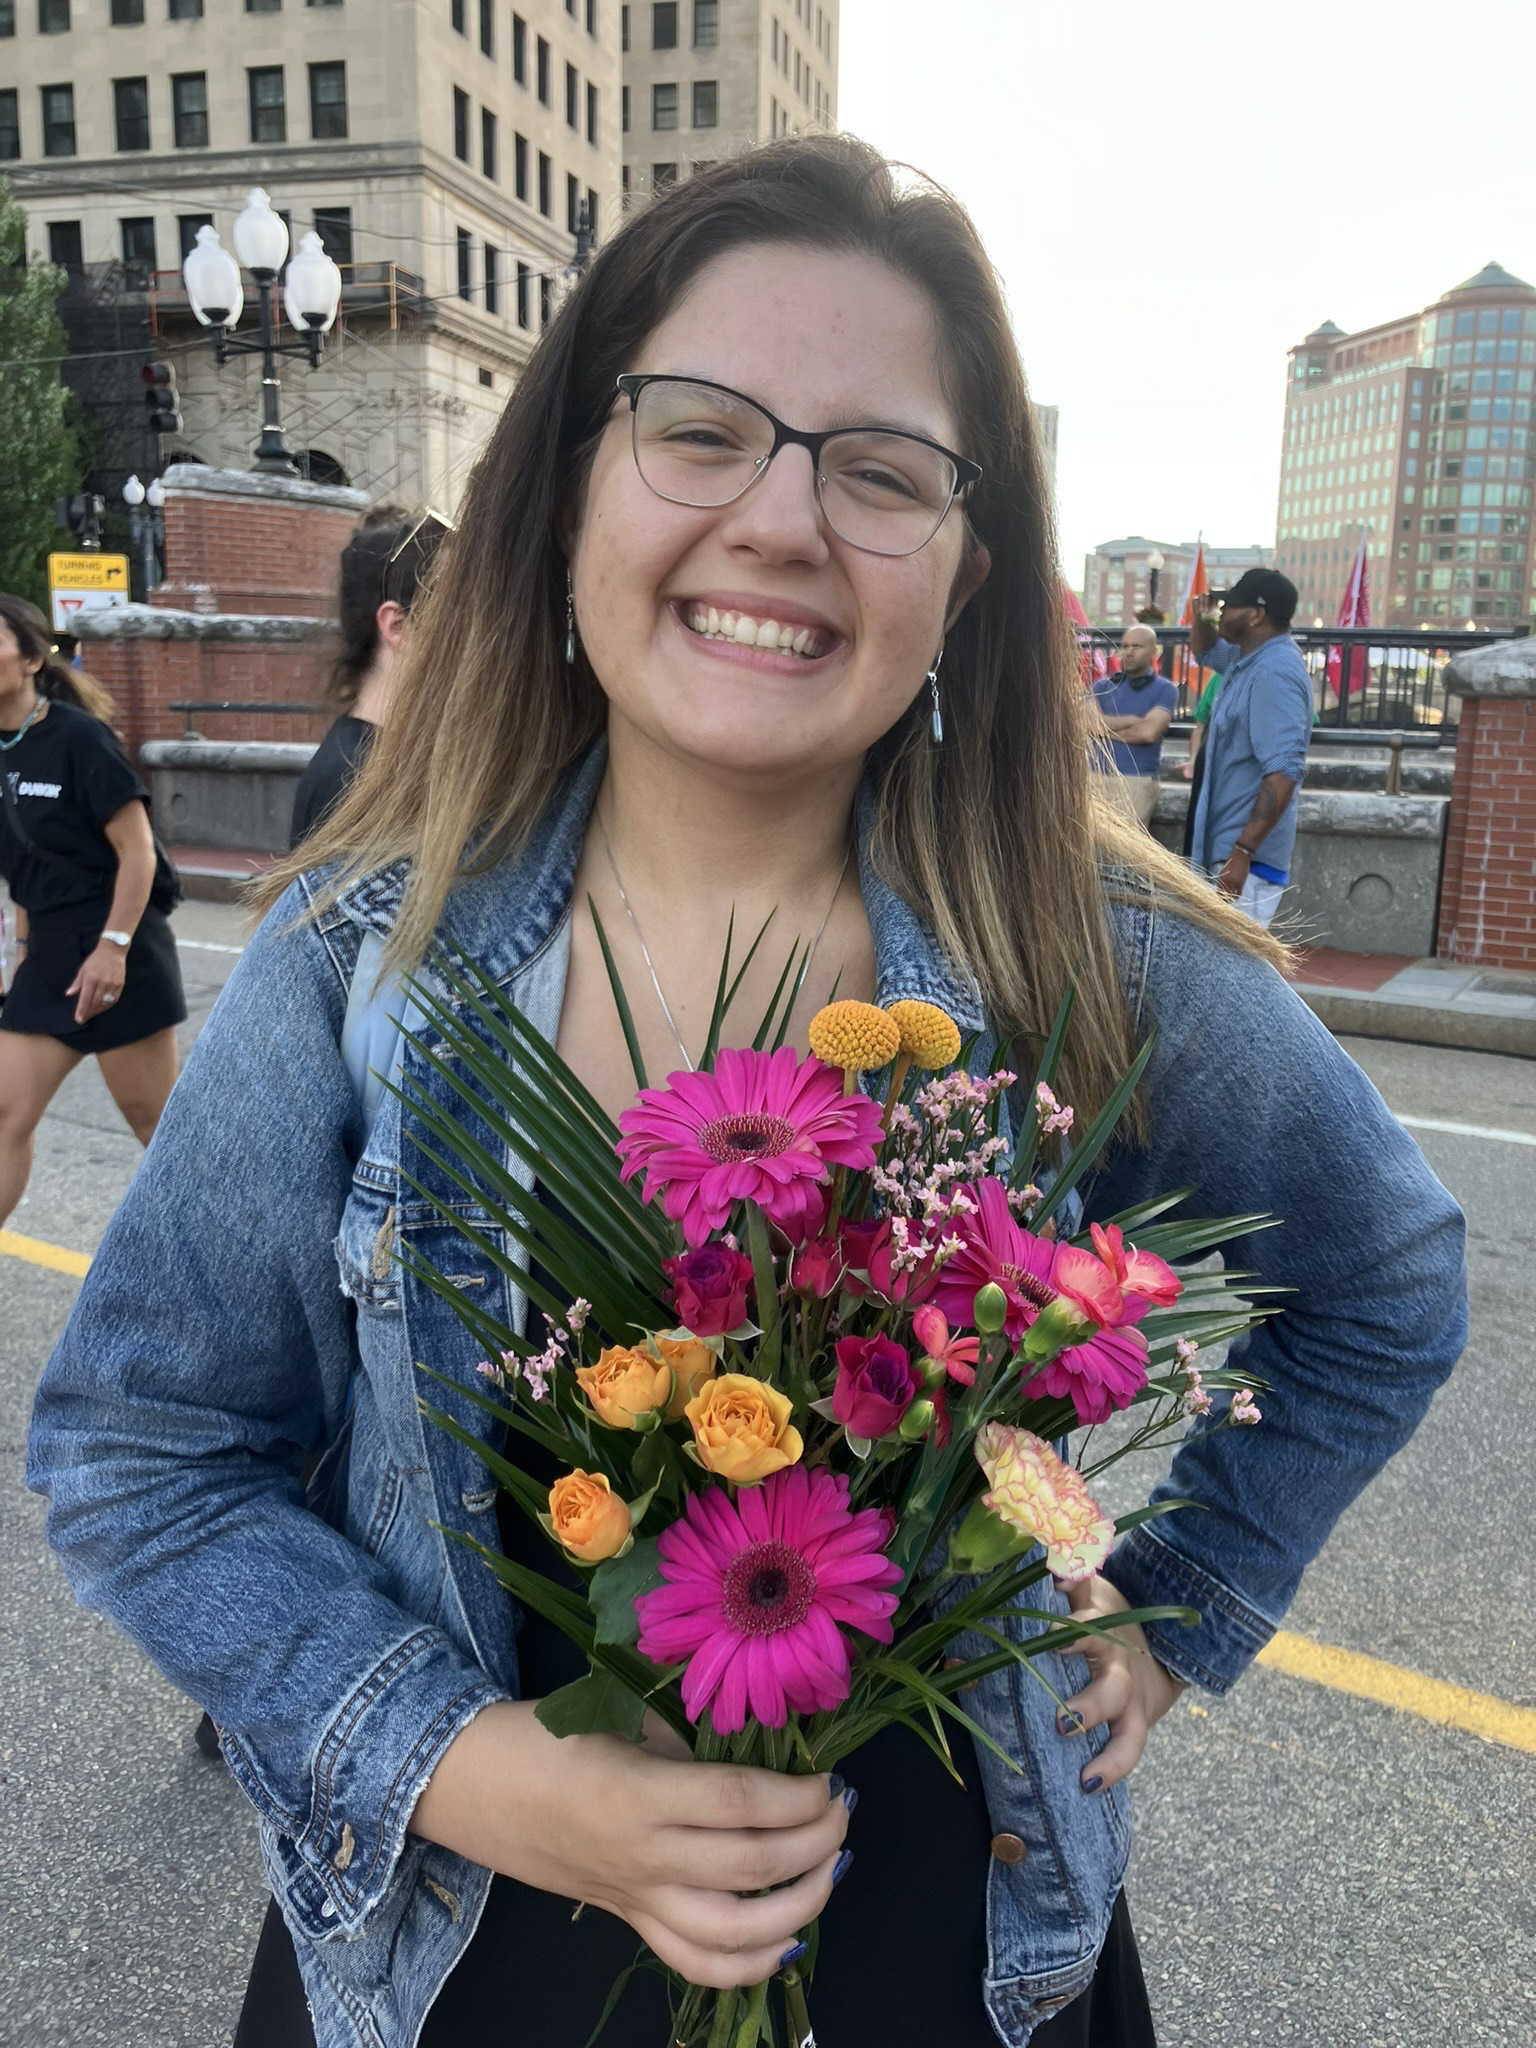 Nicole has brown hair and black square glasses. She wears a denim jacket and beams while holding a bouquet of flowers.